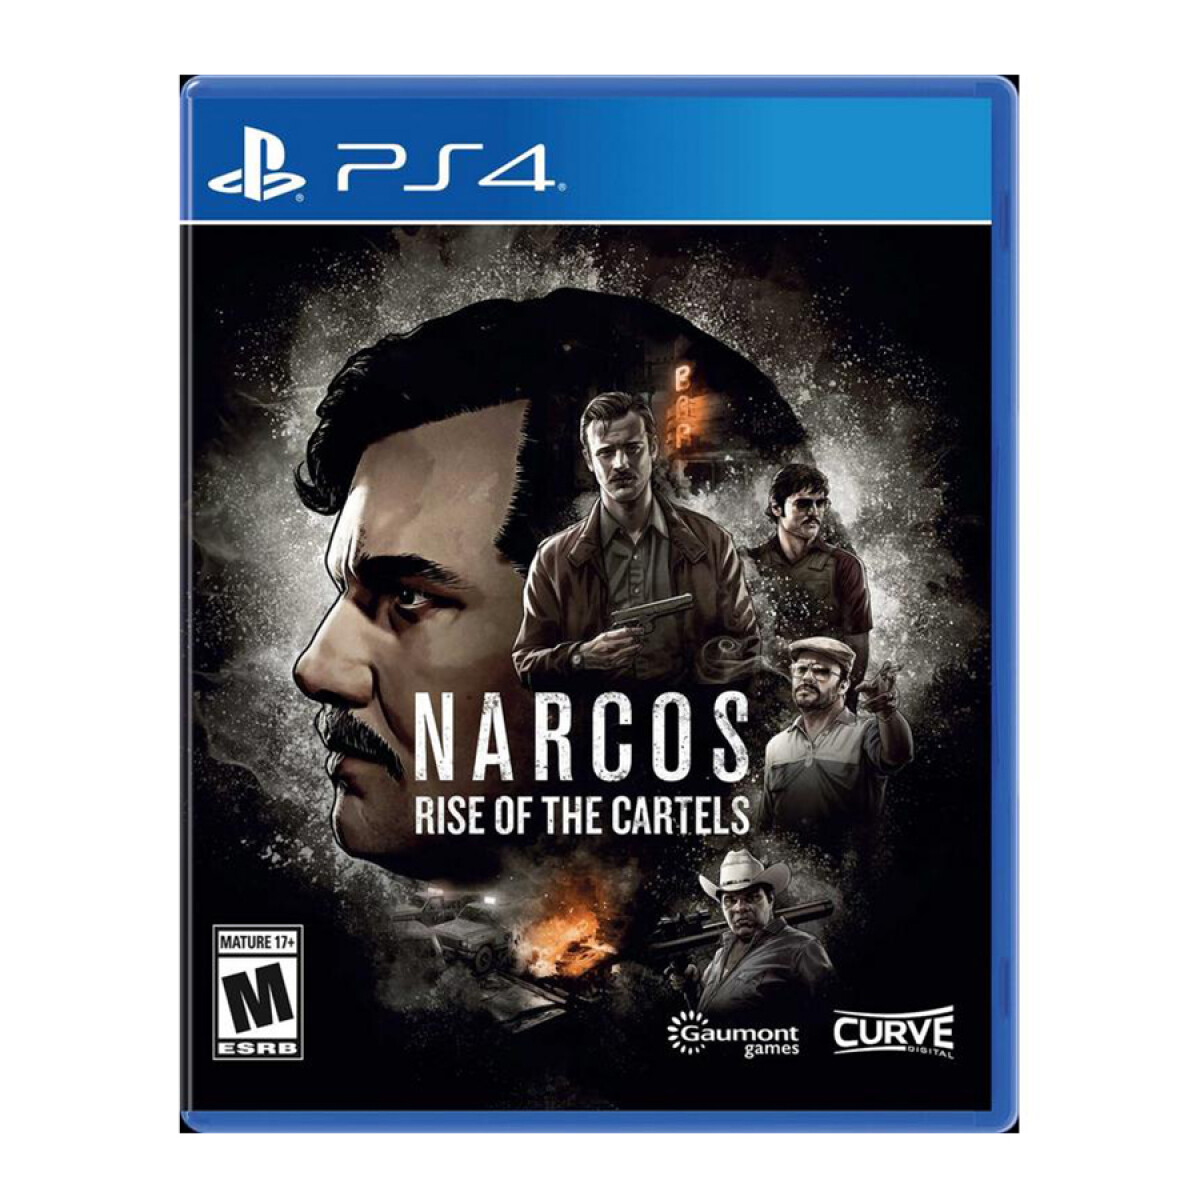 Narcos: Rise of the Cartels - PS4 